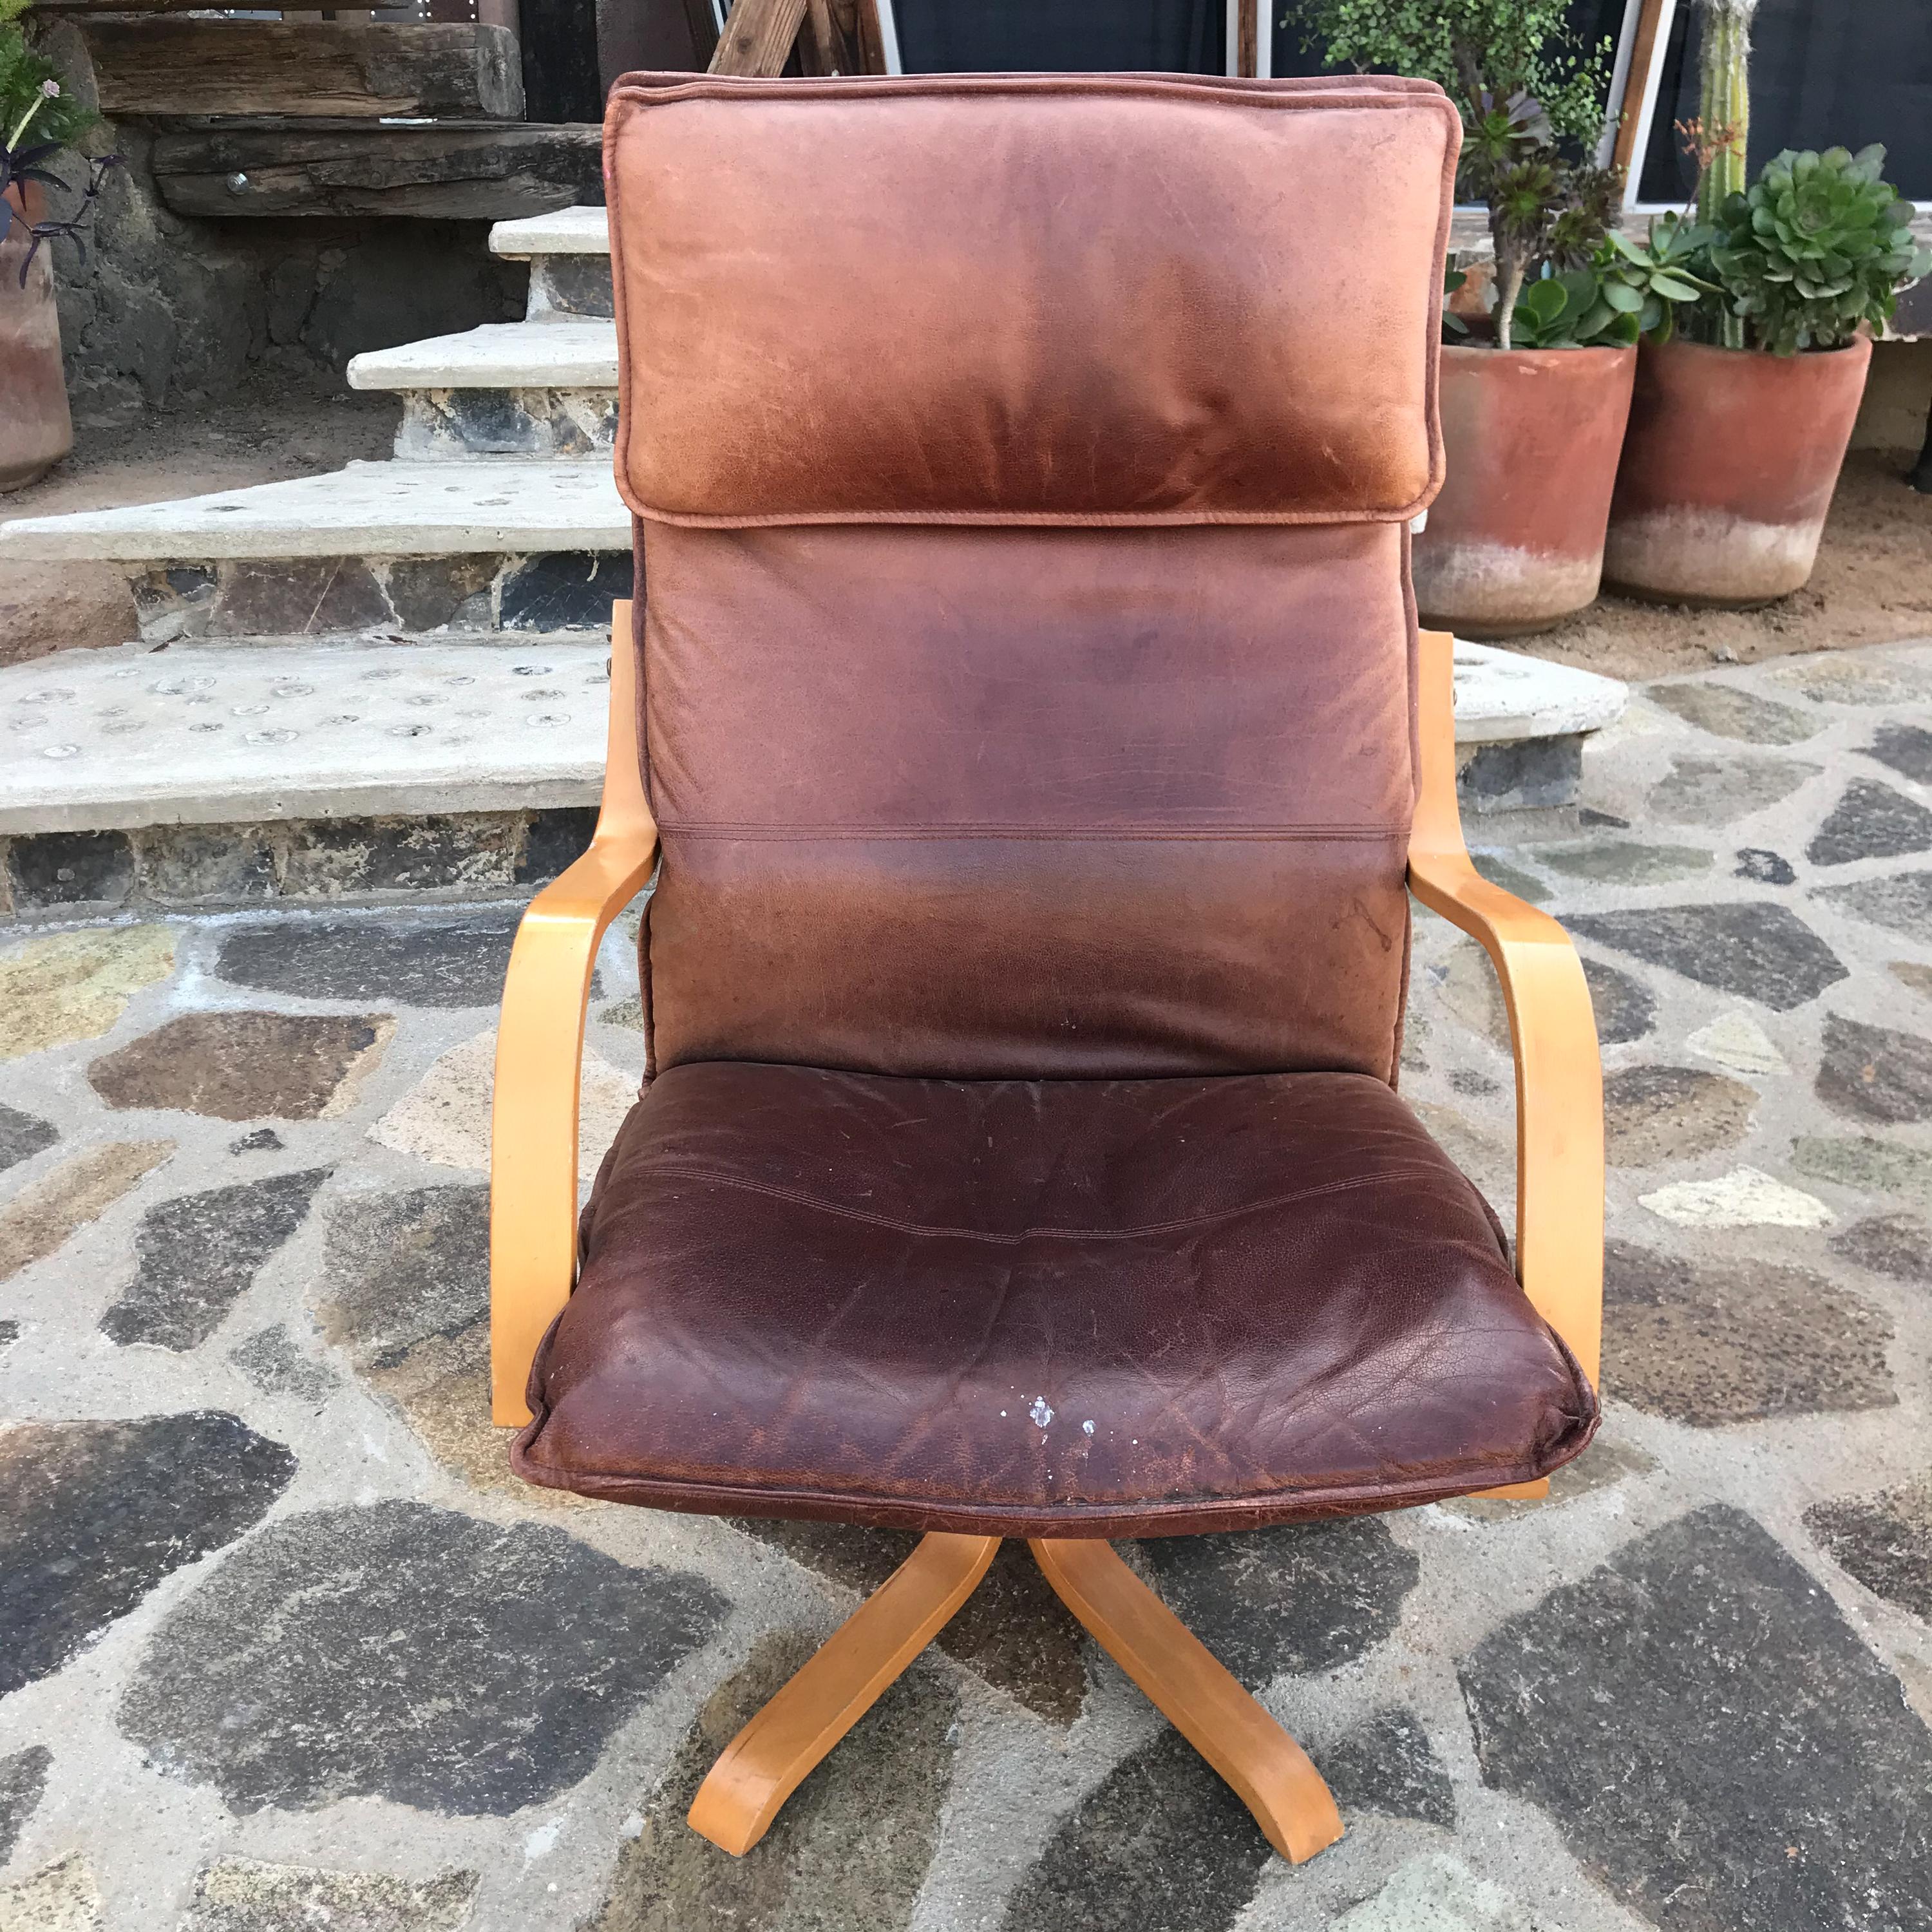 1960s Scandinavian style Italian Swiss design made in Italy set of two vintage tall high back leather lounge chairs on a blonde wood star base.
No information on the maker available from Italy
Price is per set of two chairs similar to De Sede and